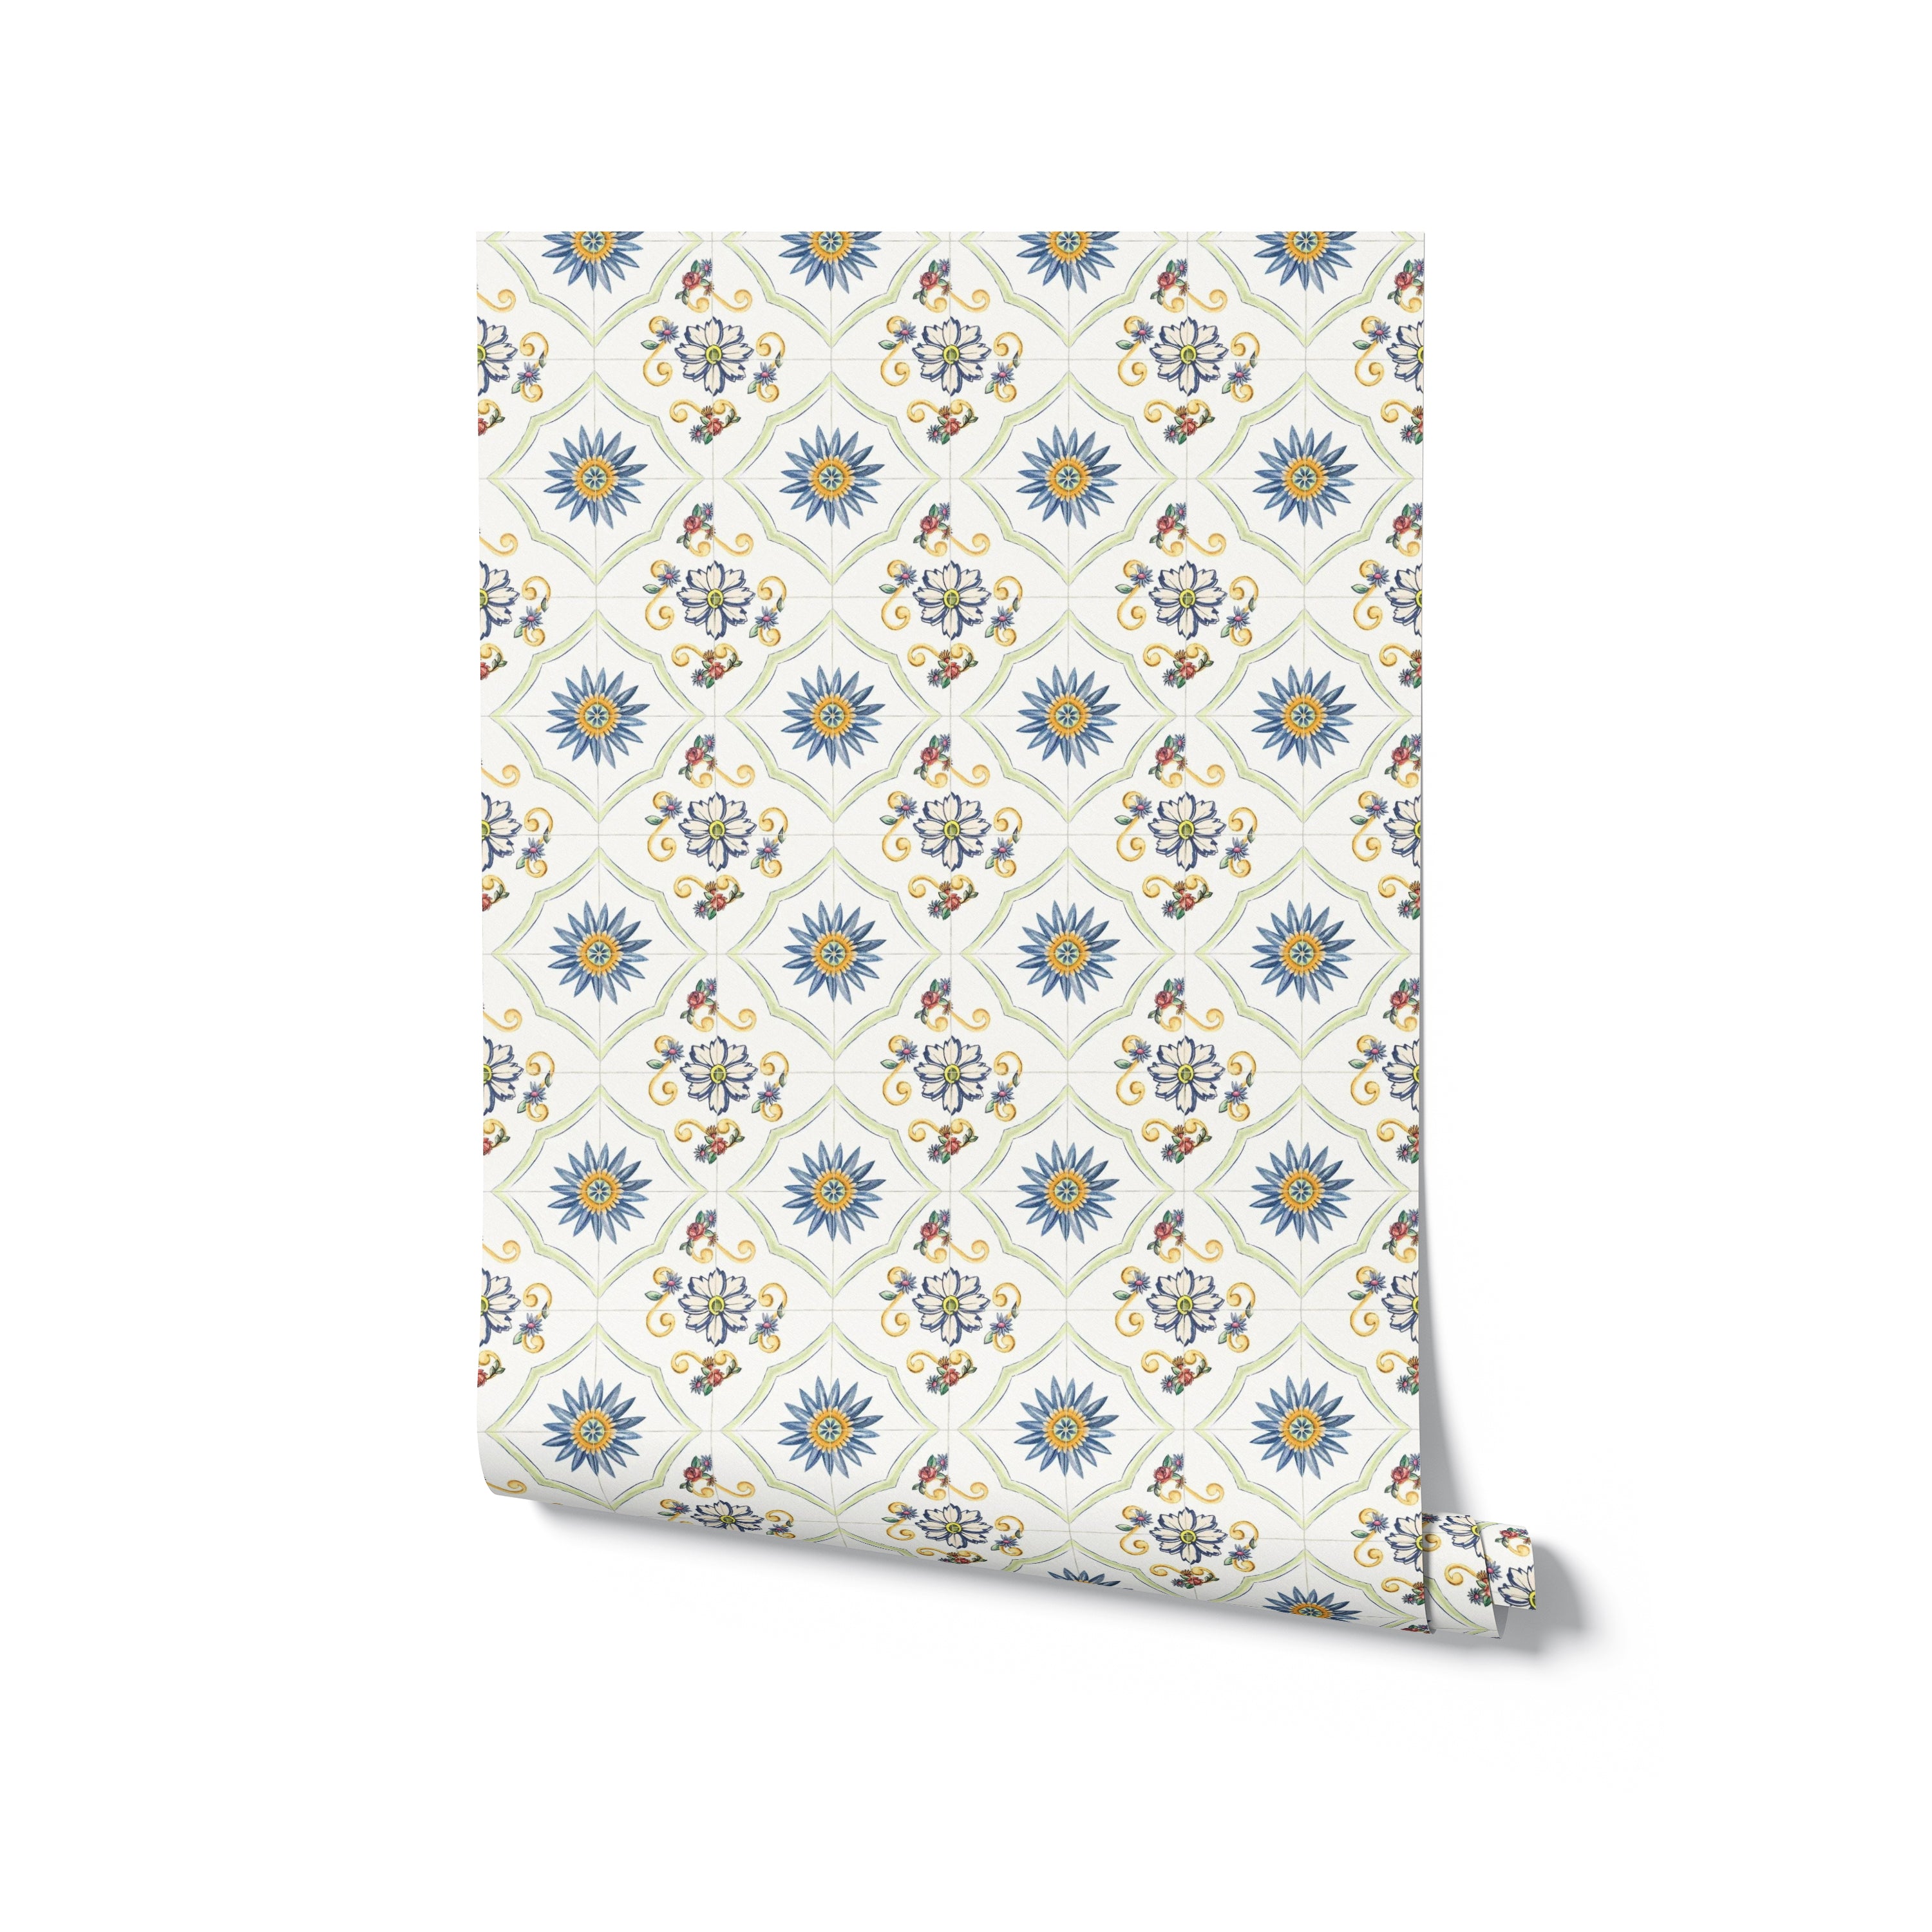 A realistic digital representation of a roll of Spanish Tile Wallpaper leaning against a plain background. The wallpaper features a geometric and floral pattern with blue, yellow, and green motifs on a light cream base, conveying a Mediterranean aesthetic.